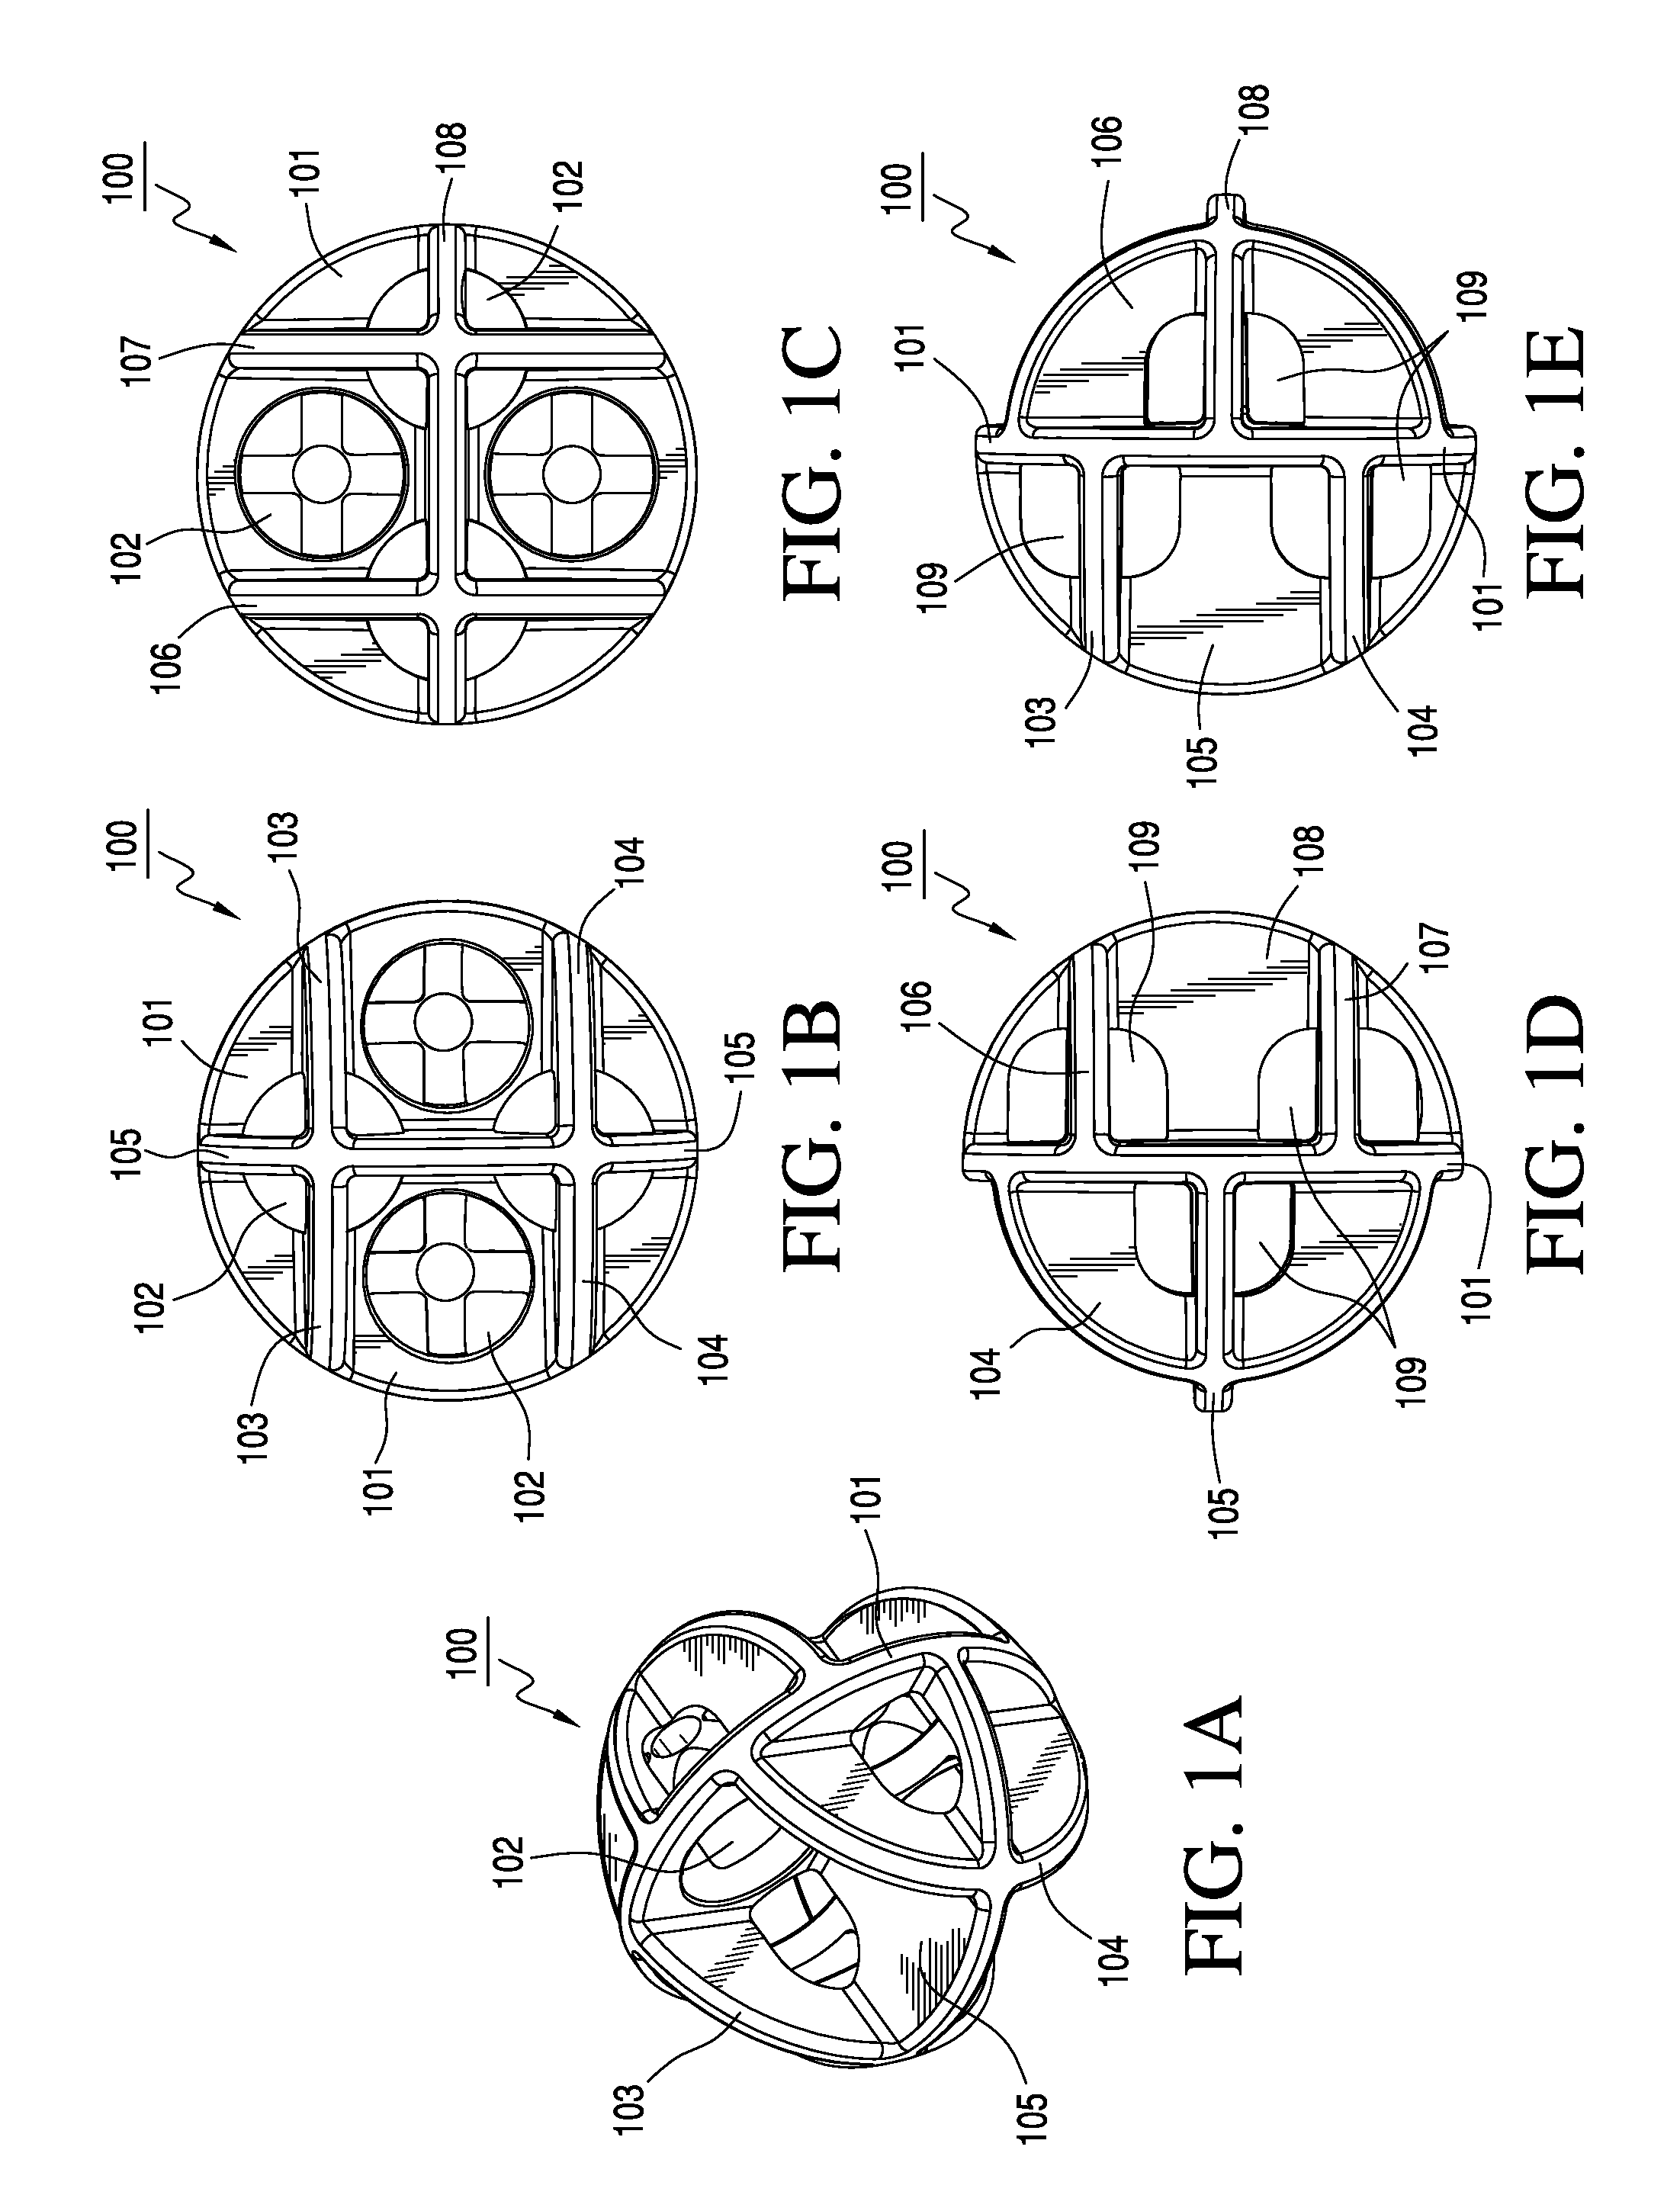 Interlocking reinforcement inclusions usable in ultra-high performance concrete and other applications, improved uhpc material and method of making same